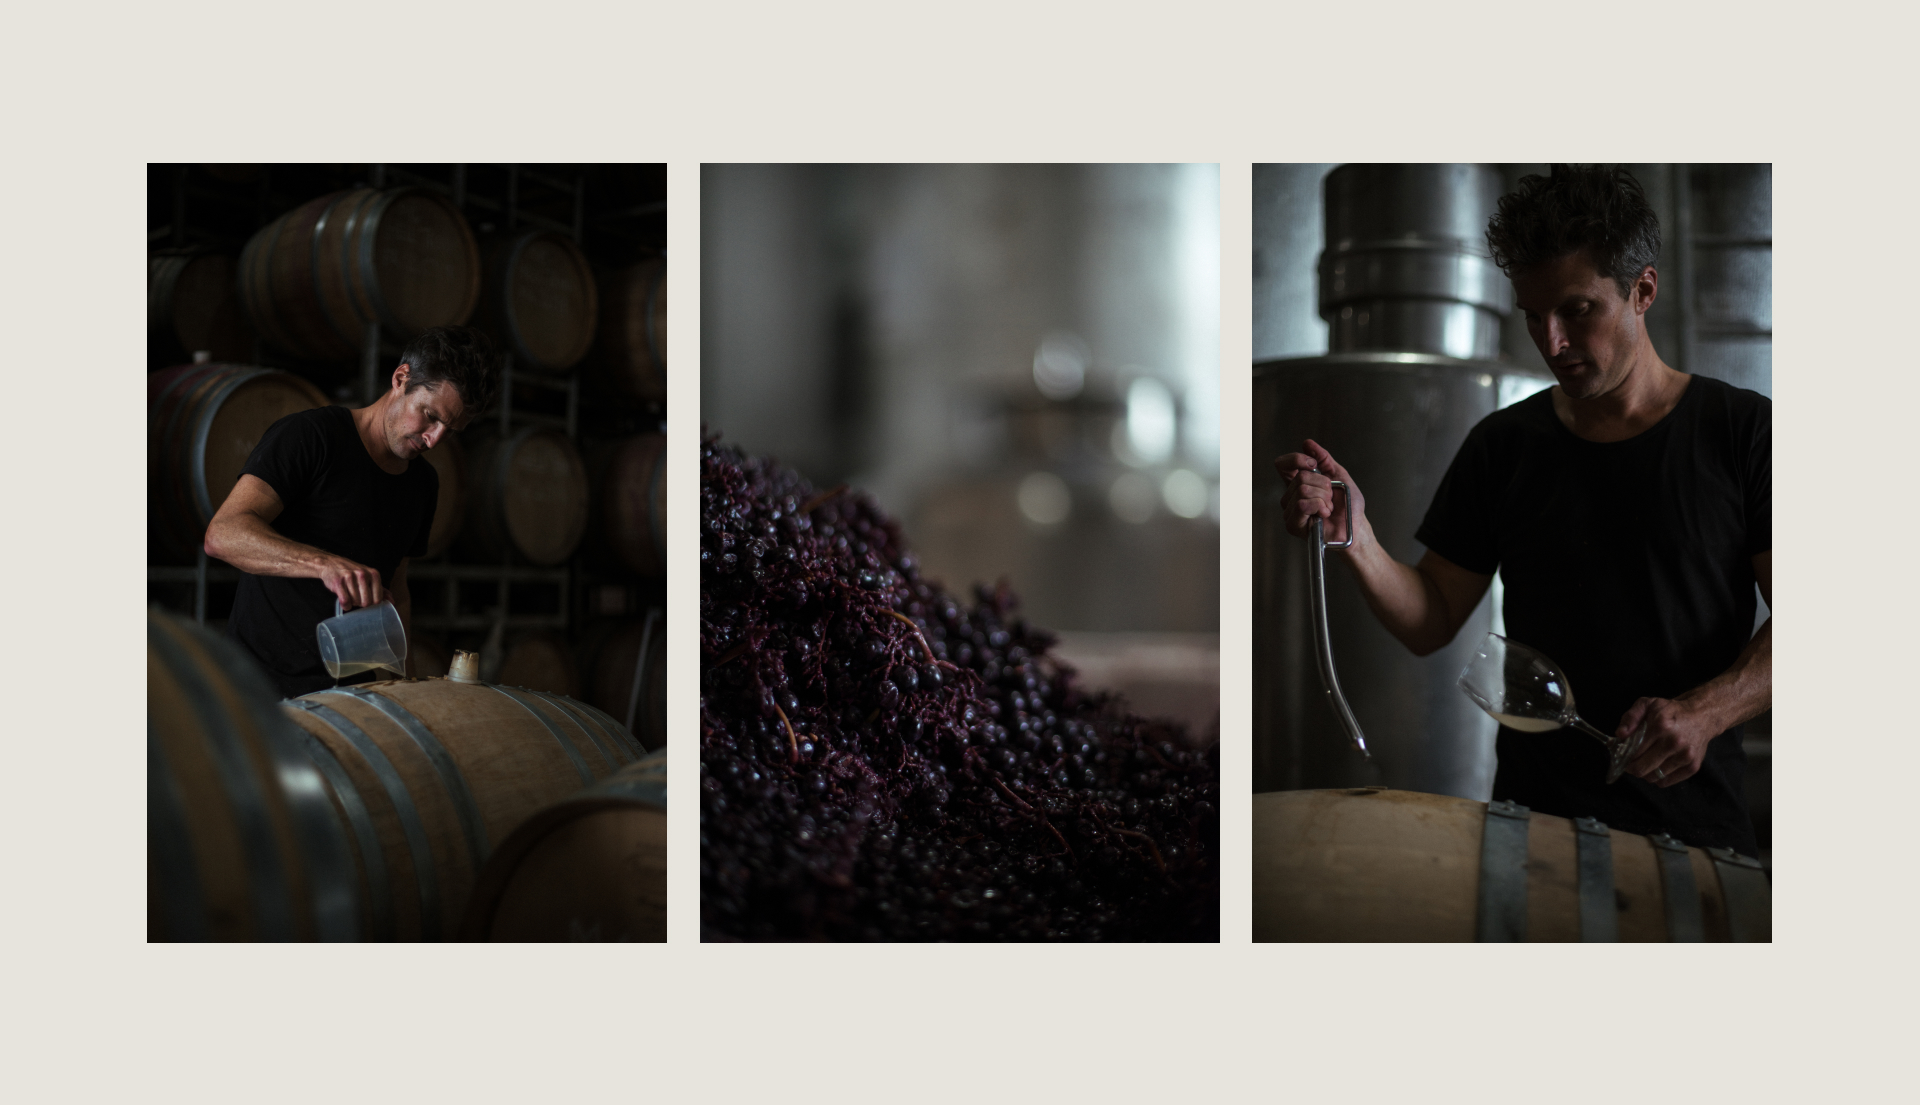 Three photographs on beige background. Image one is winemaker pouring liquid into wine barrel. Image two is a pile of purple grapes. Image three is wine maker using a basting tool to pull wine from barrel and into a wine glass.